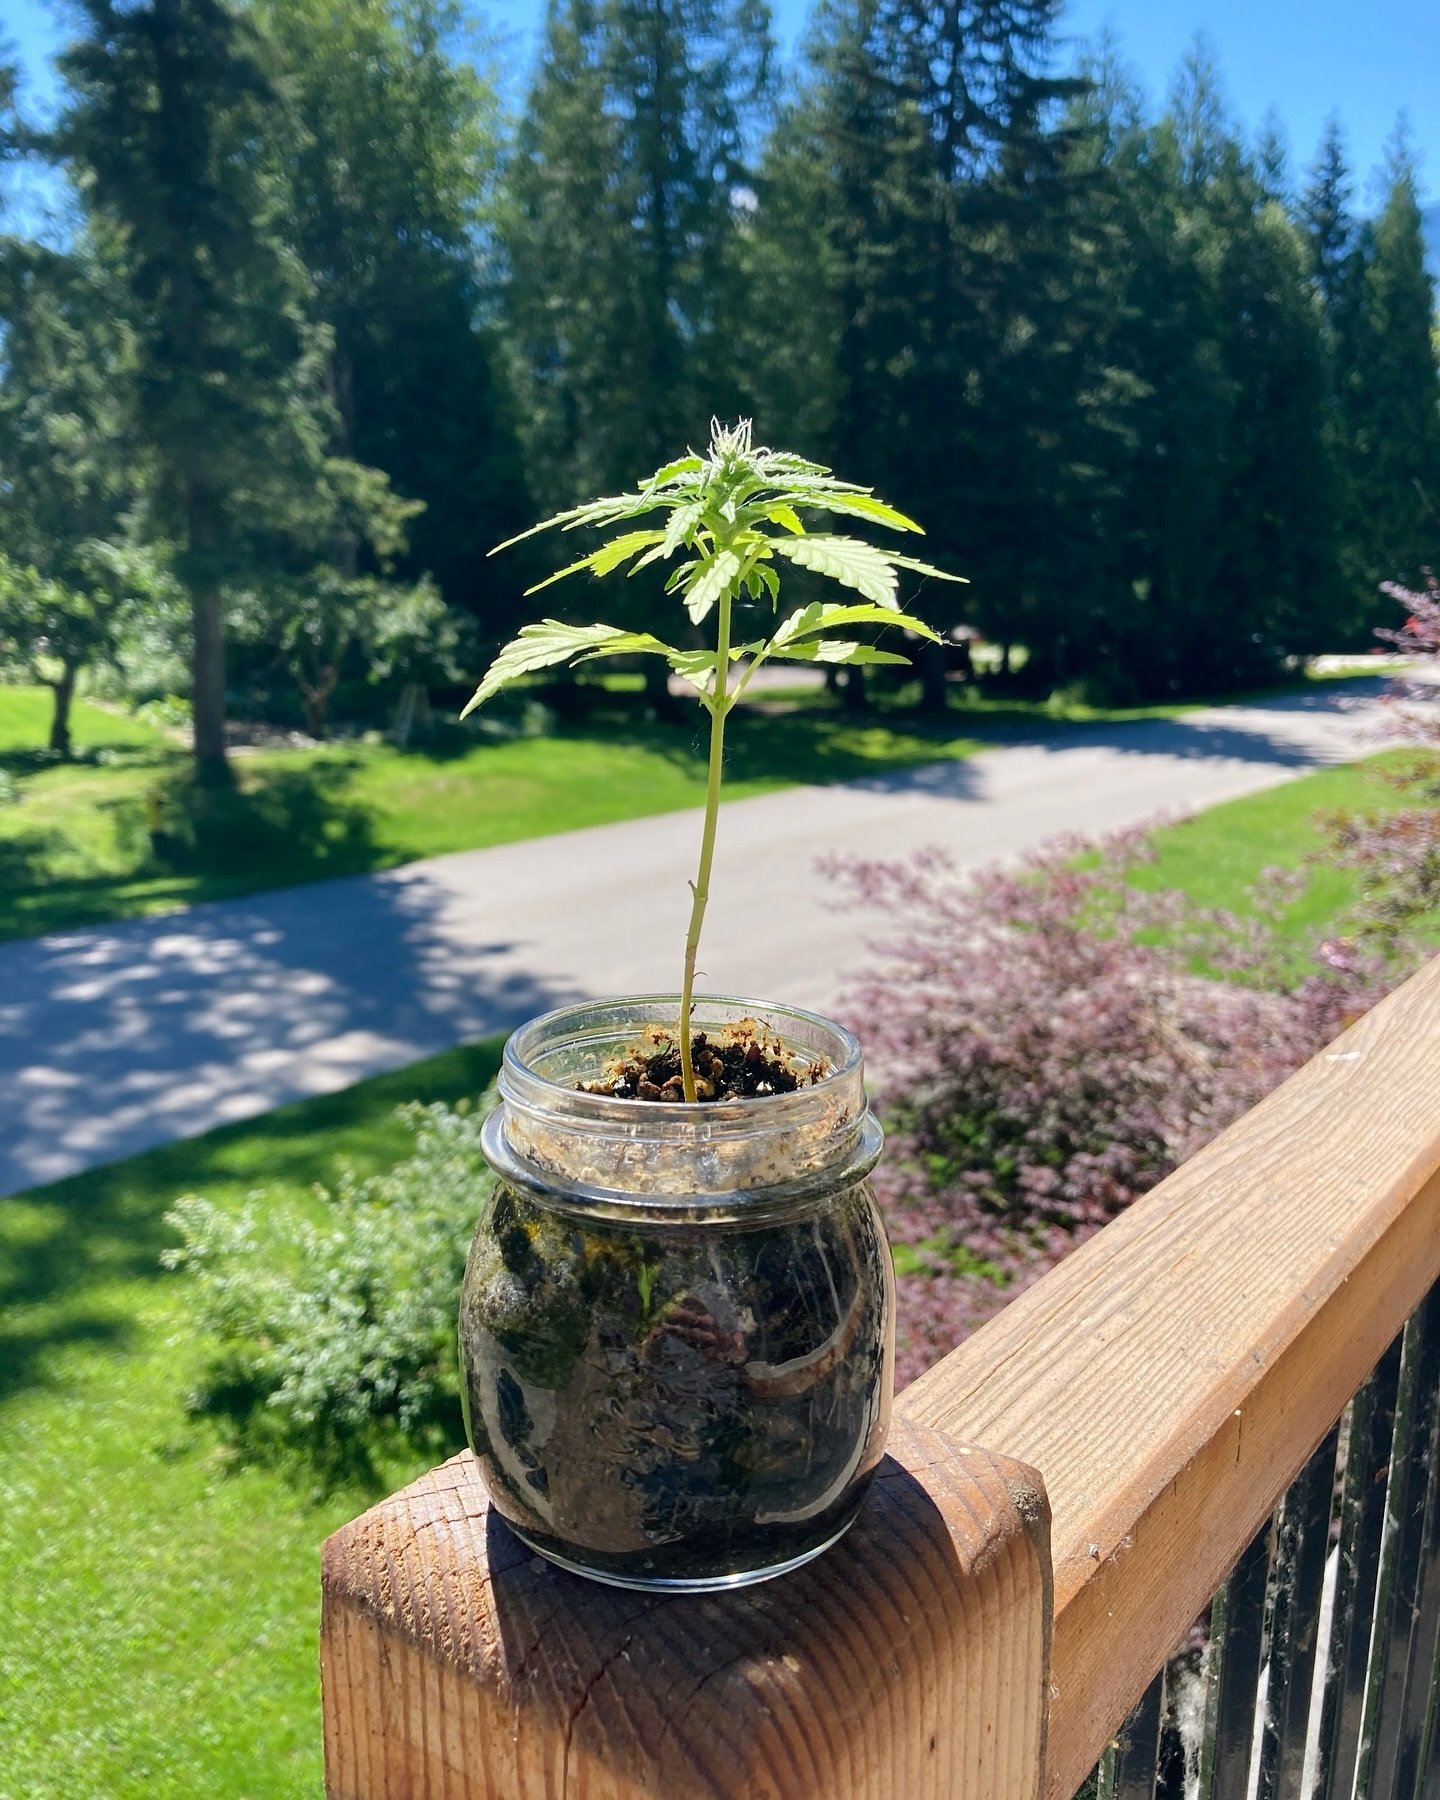 Happy M8 day Revelstoke! May 8 is also a great time to get plants going. Whats everyone growing this year?